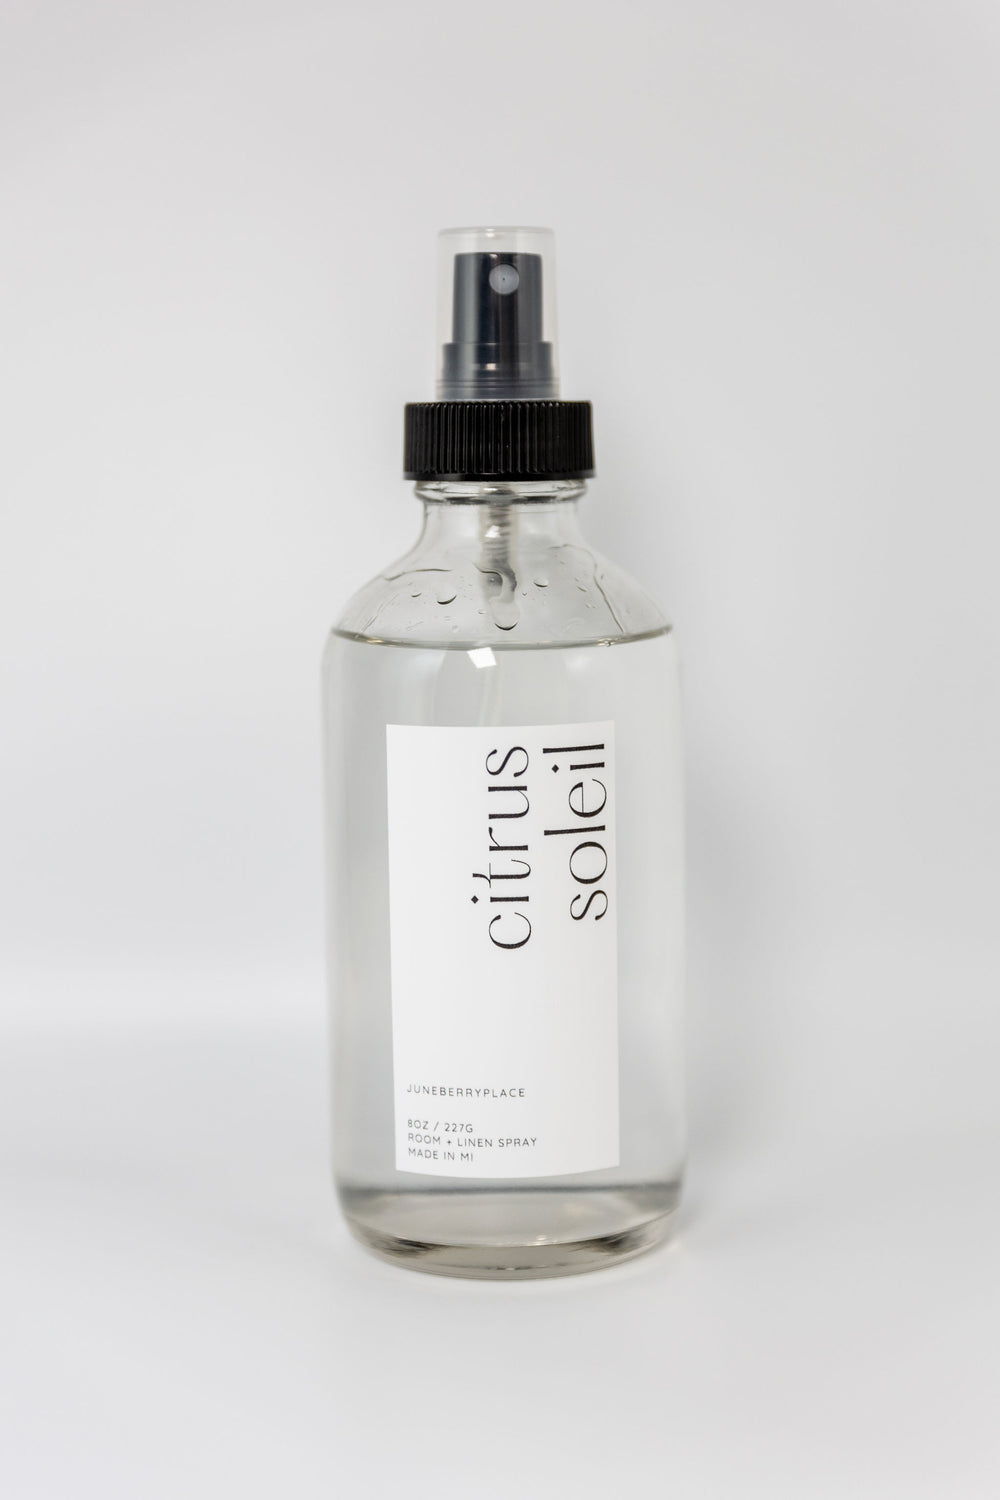 Citrus Soleil Room + Linen Spray - Spring Collection in a glass bottle by juneberryplace home fragrances